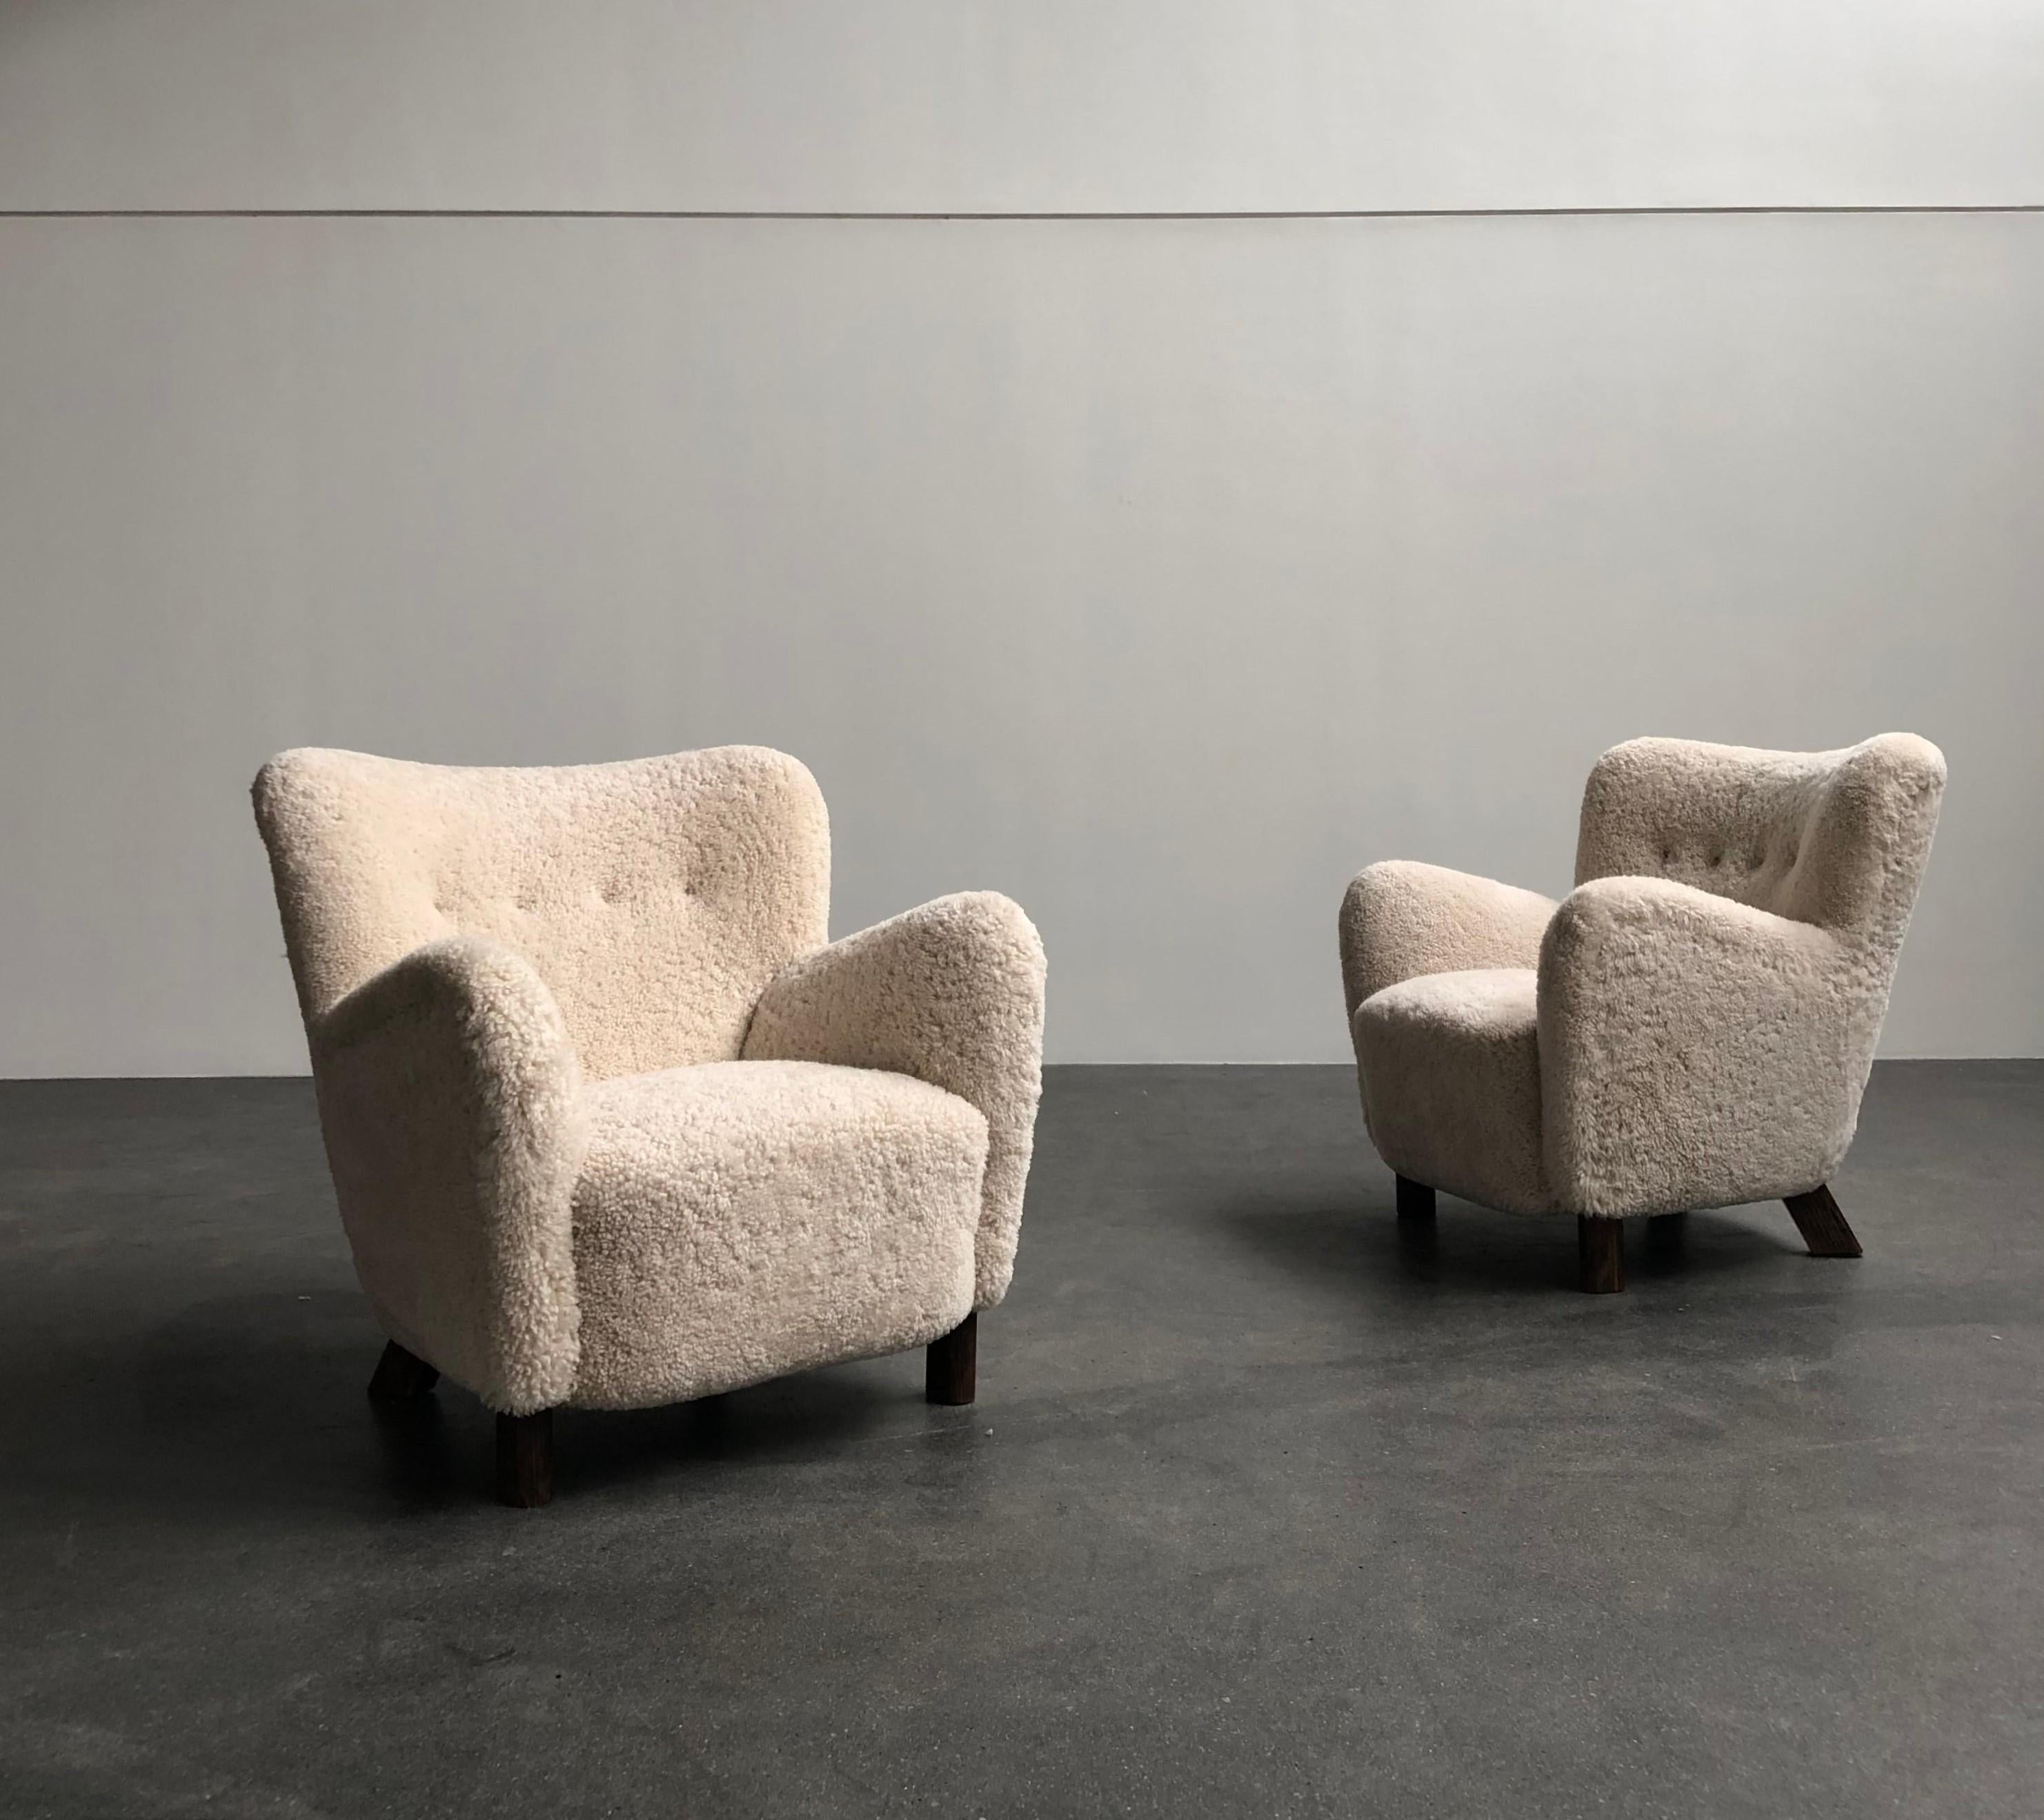 Pair of Fritz Hansen easy chairs in sheepskin, model 1669, 1930s

Sculptural chairs re-upholstered in sheepskin, legs of stained beech. All reupholstery work carried out with filling in organic materials and bottom finish with nails.
